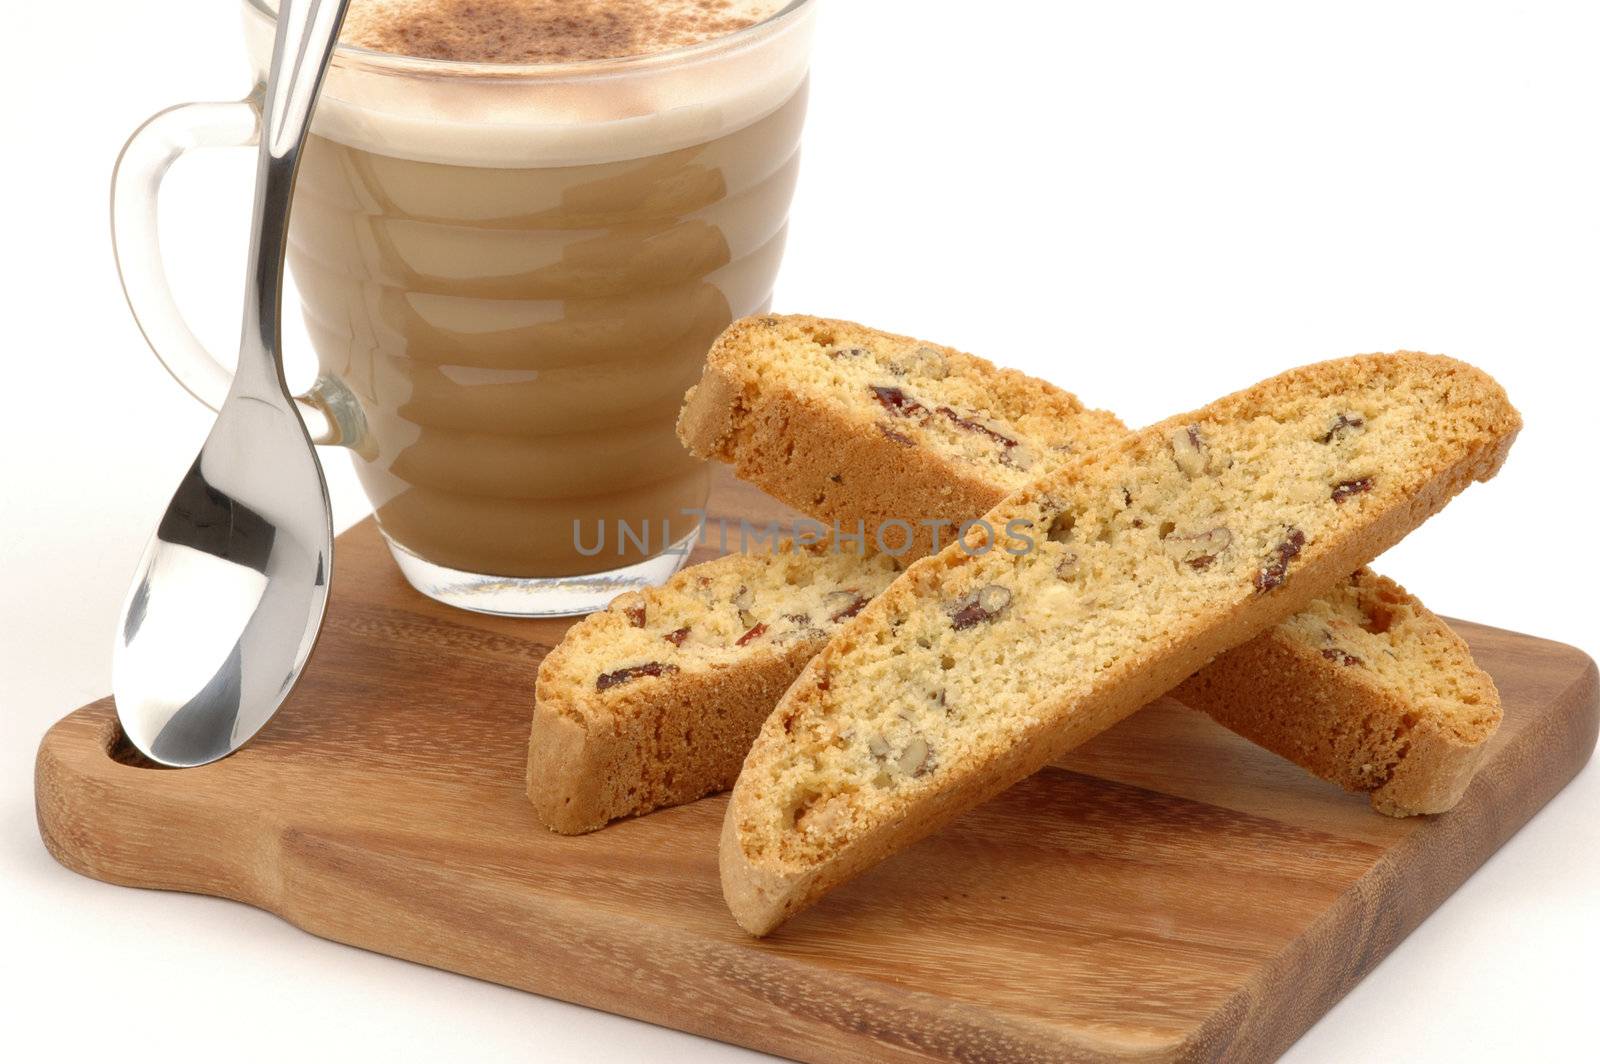 Tasty biscotti and cappuccino served on a wooden board.